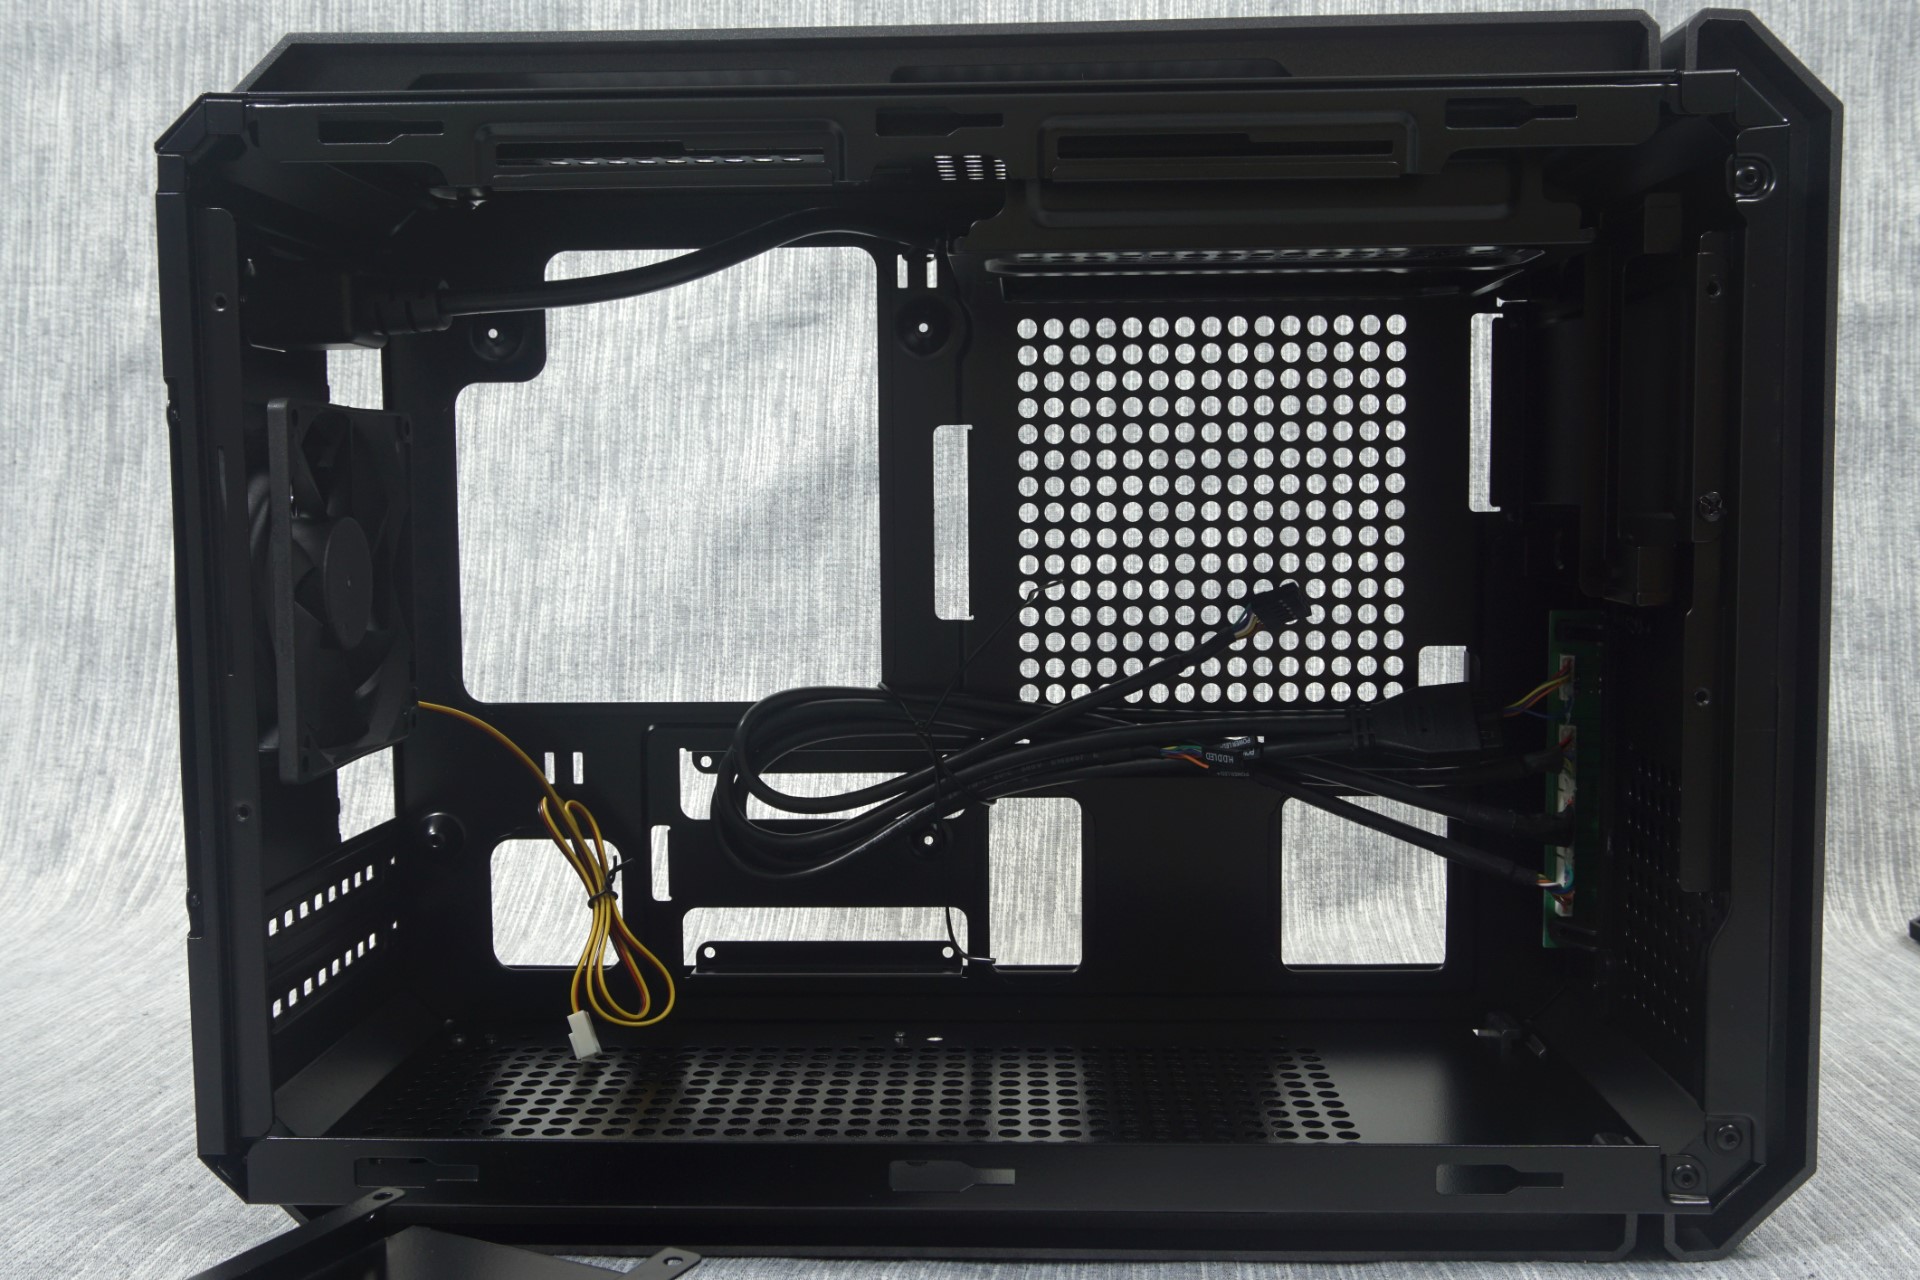 The Interior of the Cougar QBX Case - The Cougar QBX Mini ITX Case Review